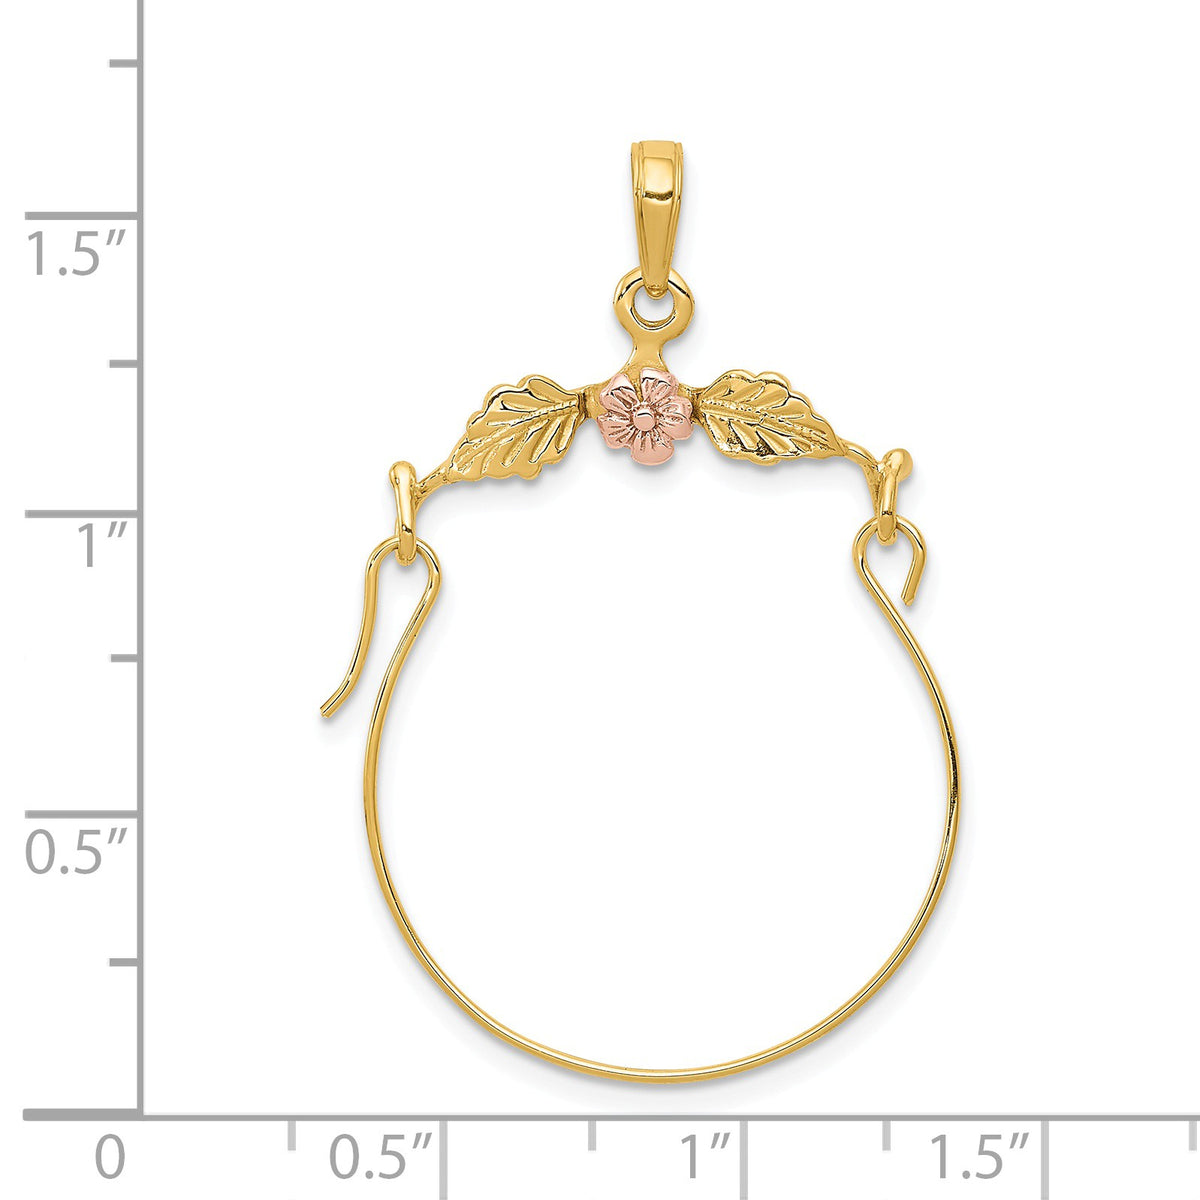 Alternate view of the 14k Yellow and Rose Gold Two Tone Floral Charm Holder Pendant by The Black Bow Jewelry Co.